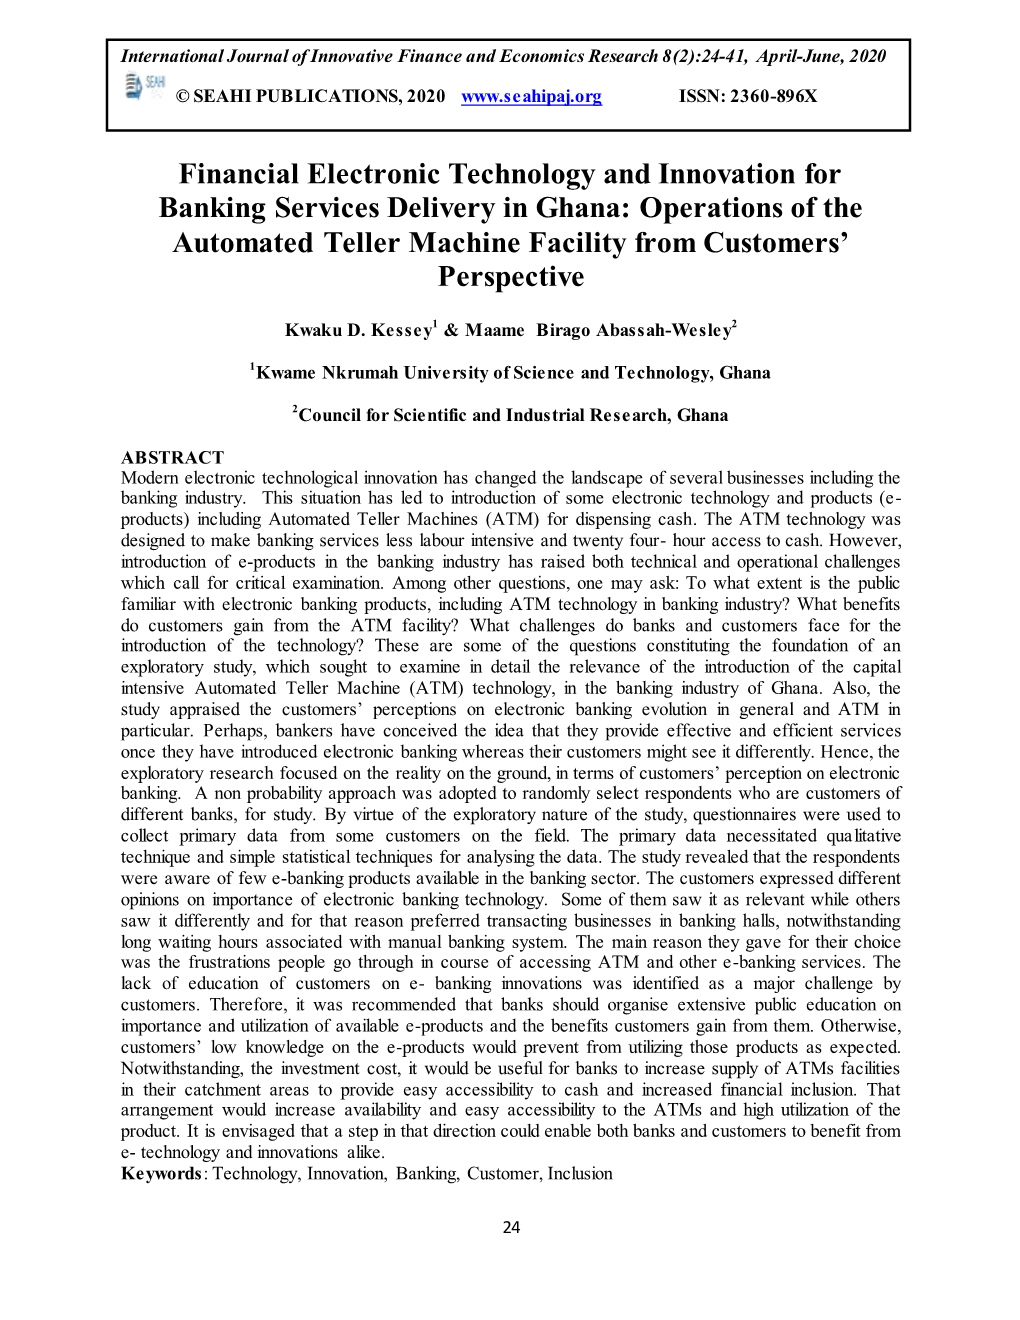 Financial Electronic Technology and Innovation for Banking Services